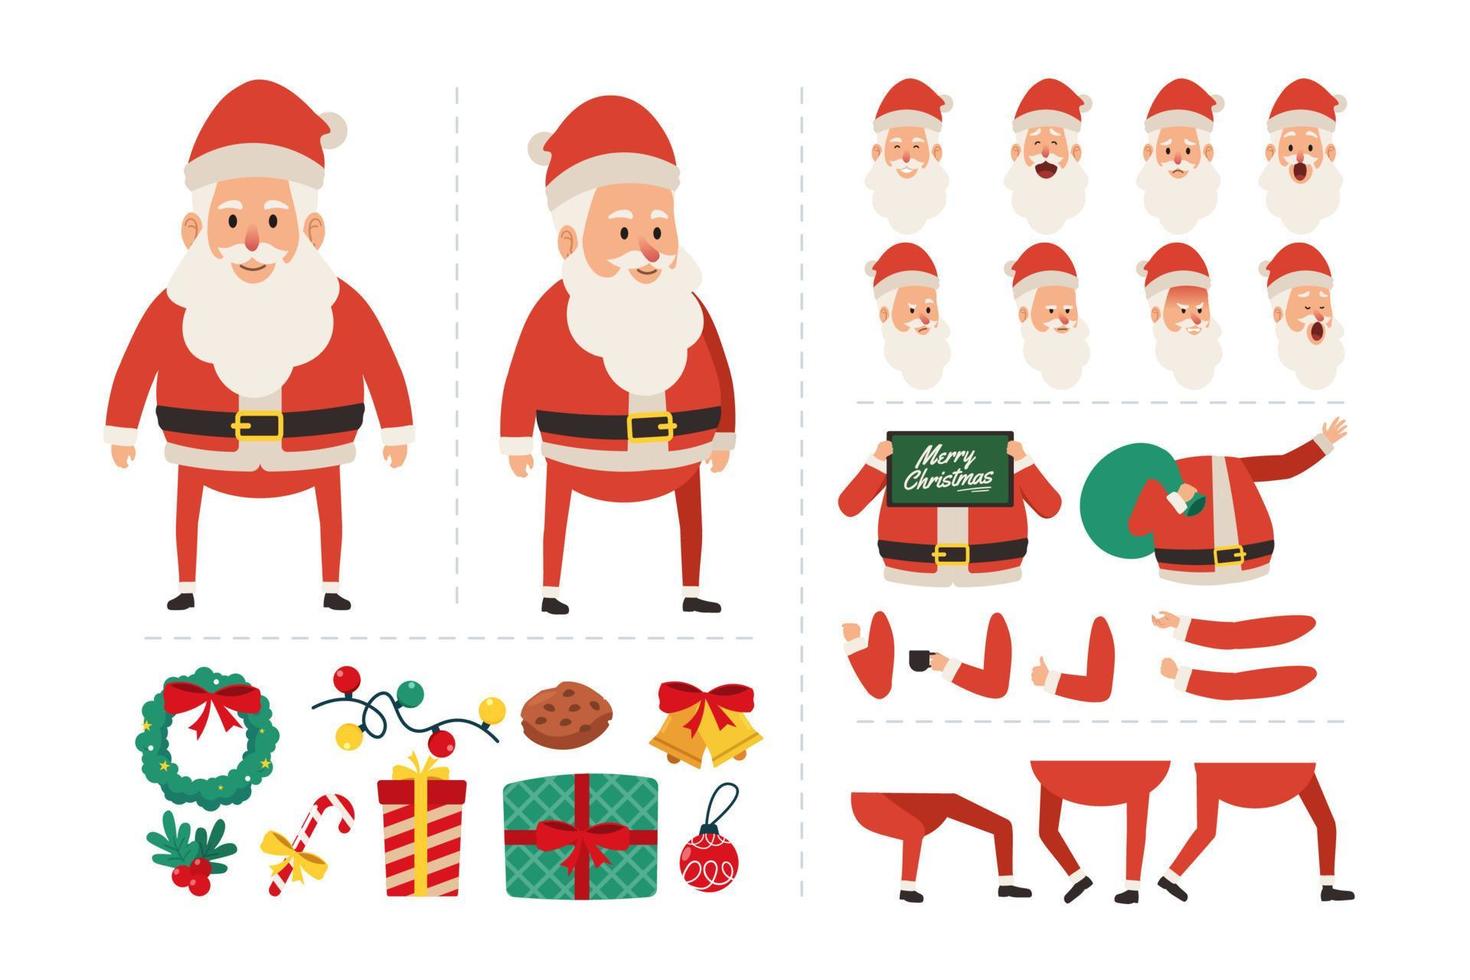 Santa claus cartoon character with various facial expressions, hand gestures, body and leg movement illustration. Character for christmas motion animation vector